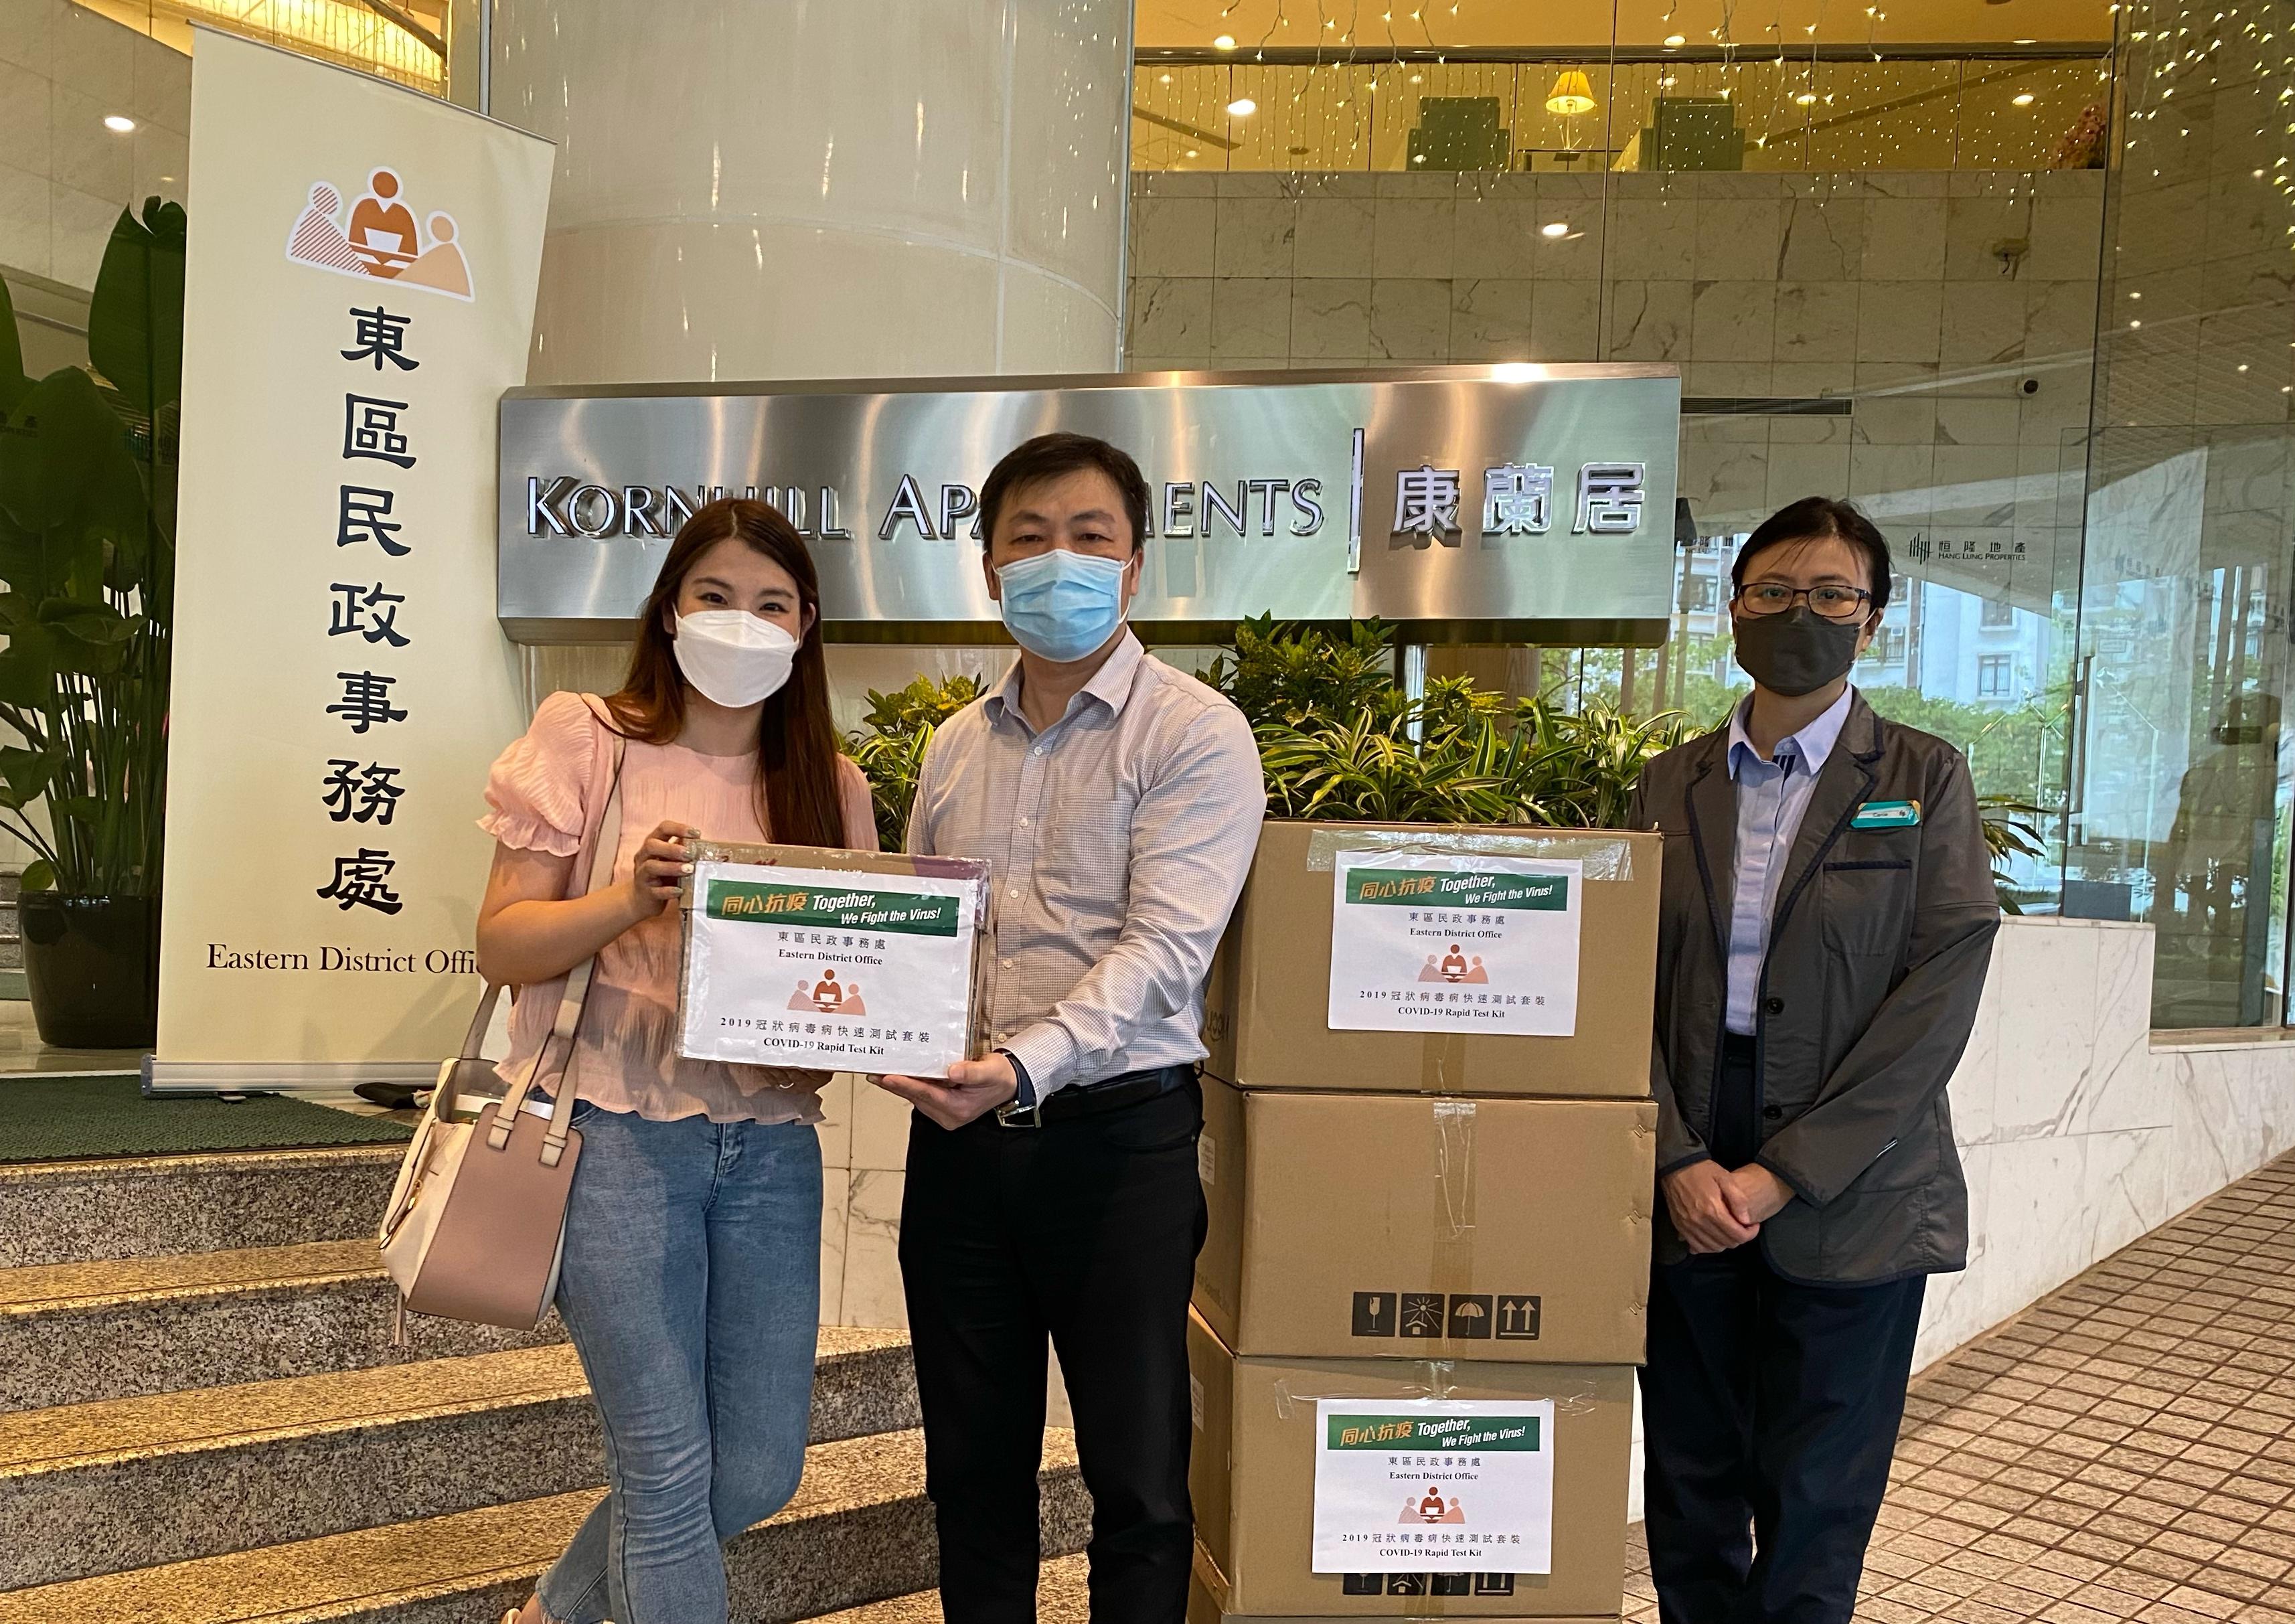 The Eastern District Office today (June 3) distributed COVID-19 rapid test kits to households, cleansing workers and property management staff living and working in Kornhill Apartments for voluntary testing through the property management company.
